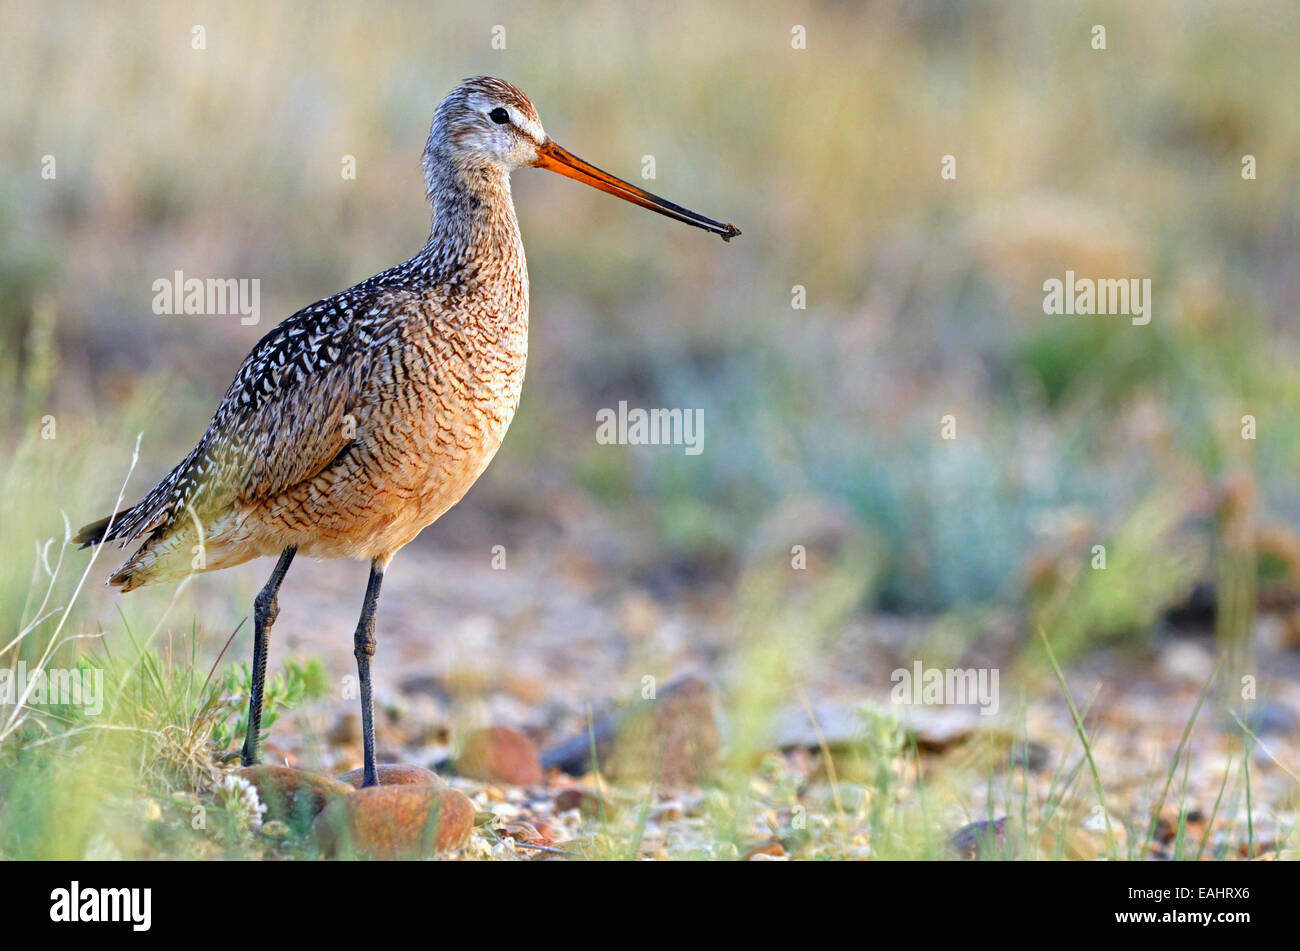 Marbled godwit portrait in the Great Plains of Montana. Charles M. Russell National Wildlife Refuge, central Montana. Stock Photo